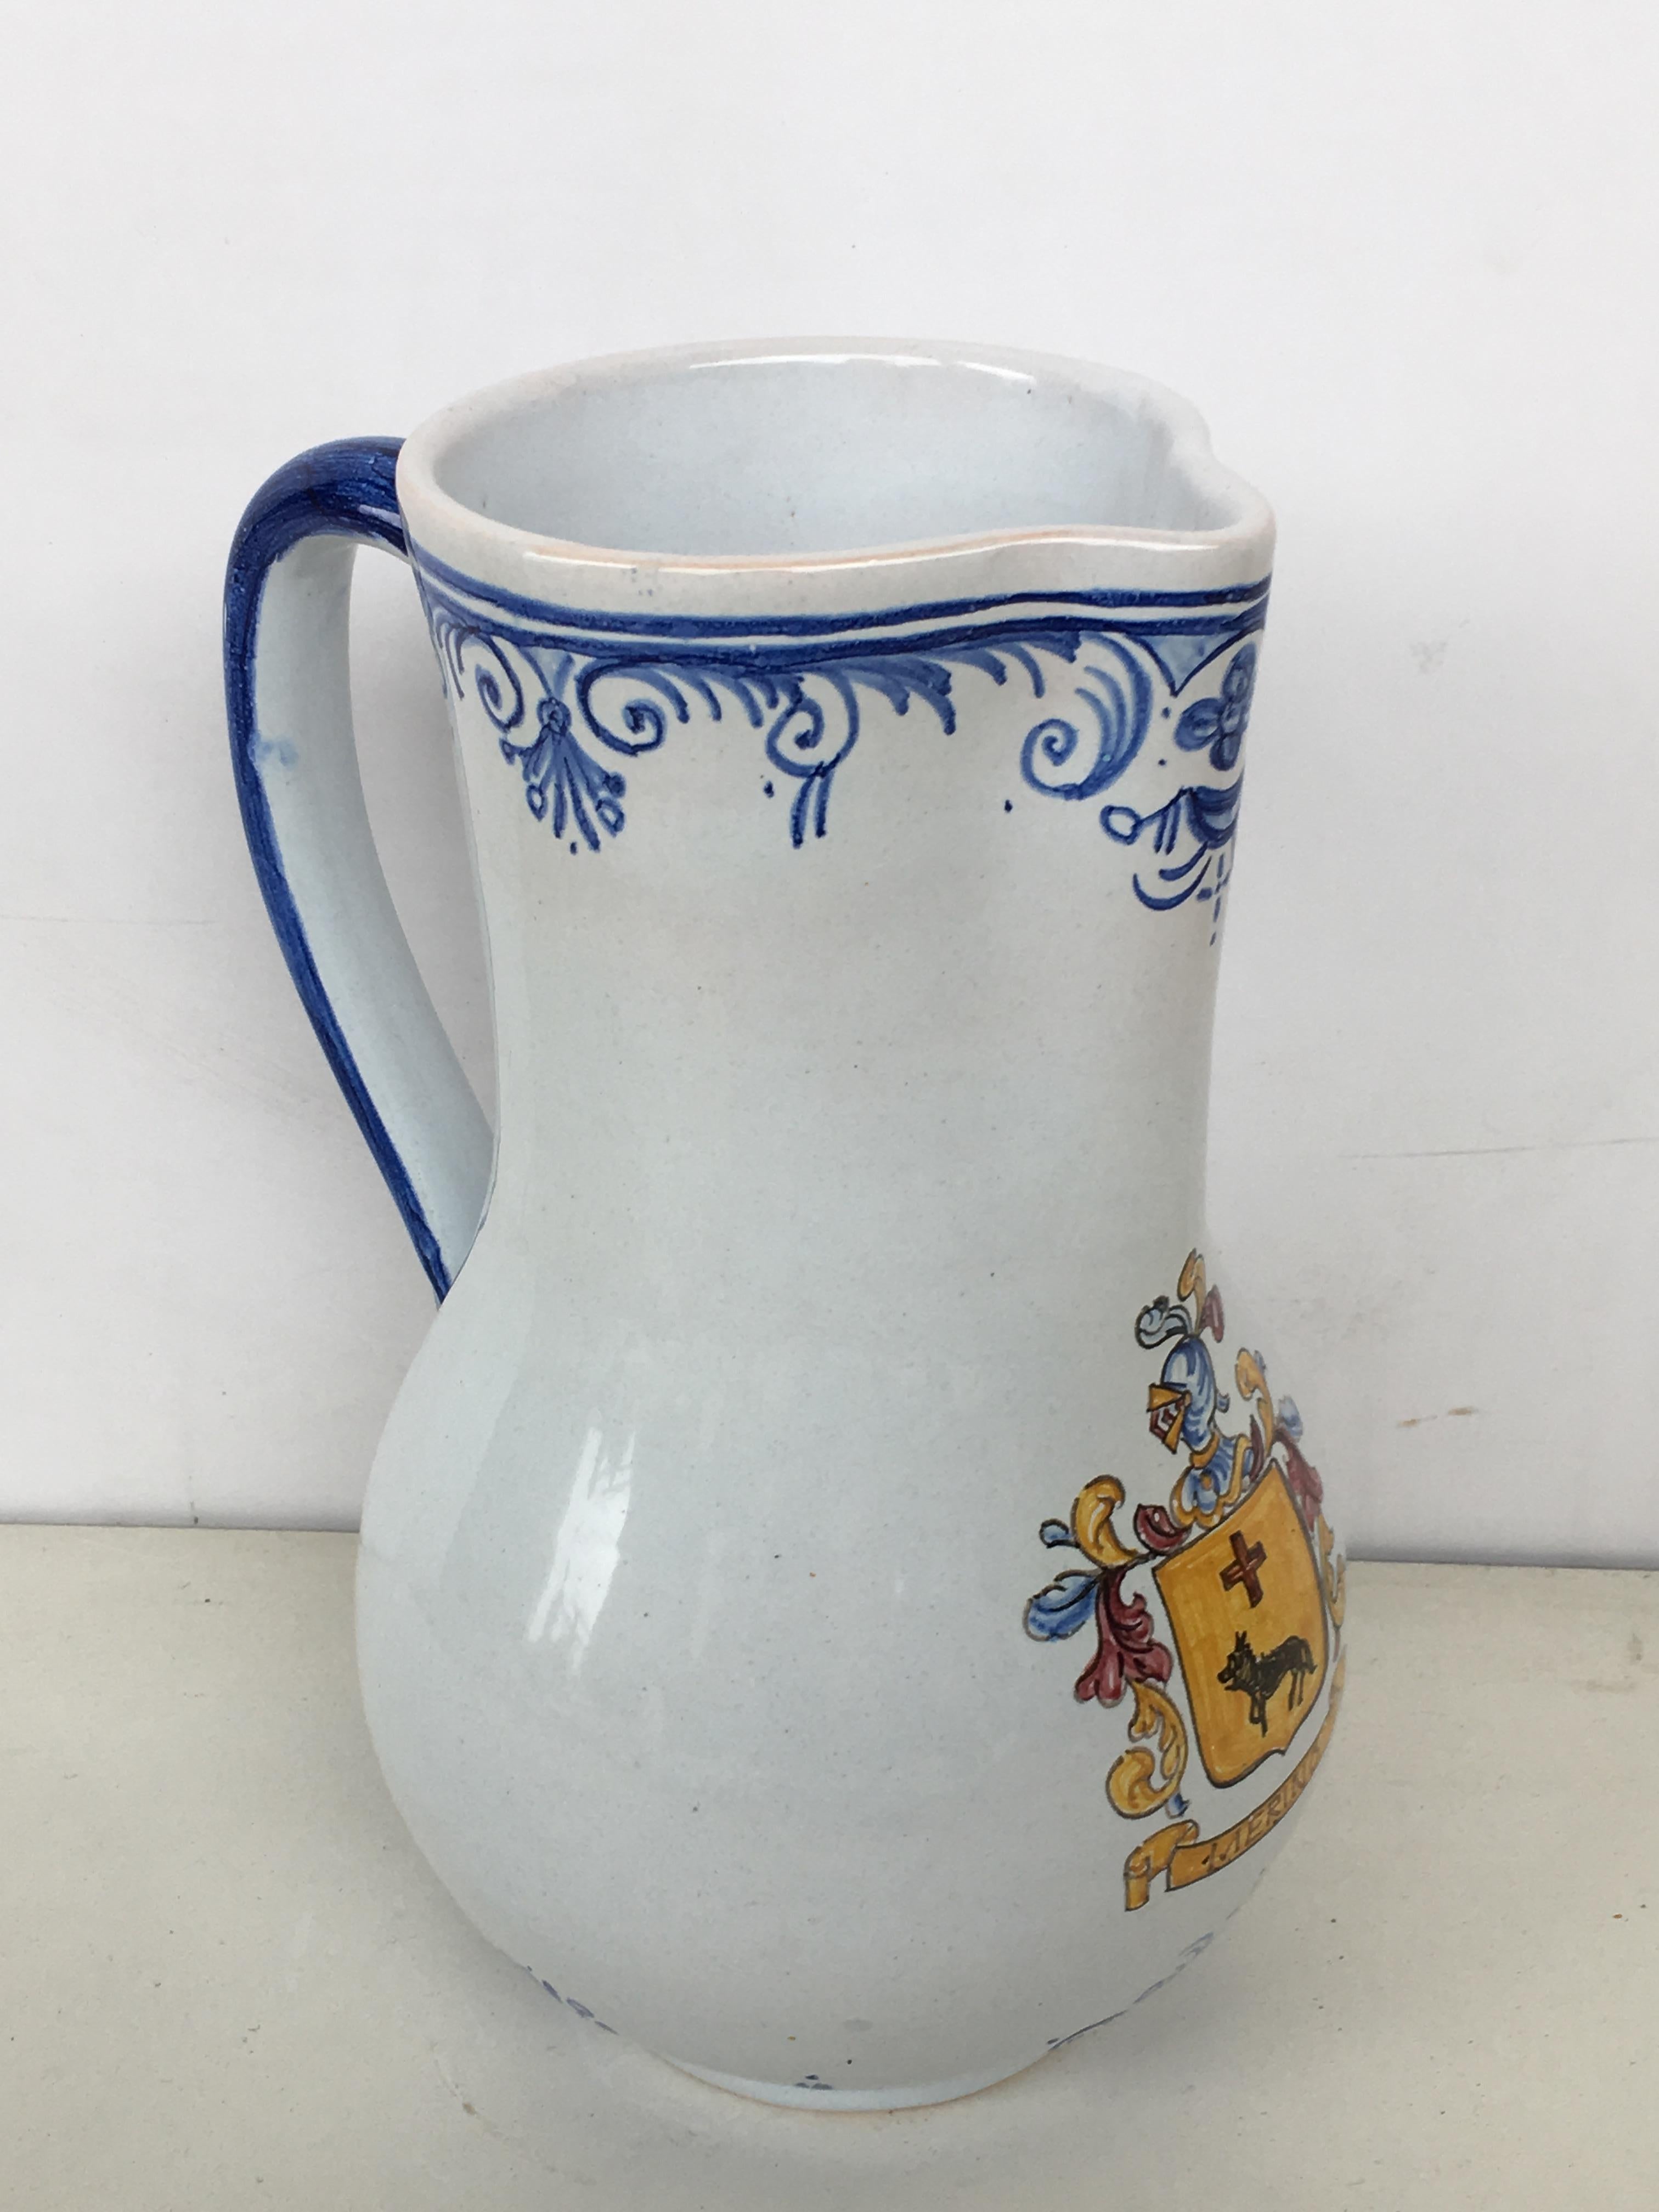 A striking Spanish glazed earthenware handled blue and white painted pitcher, the body underglaze blue decorated & heraldic shield

Talavera de la Reina pottery is a craft made in Talavera de la Reina, Toledo (Spain). Dishes, jars and other